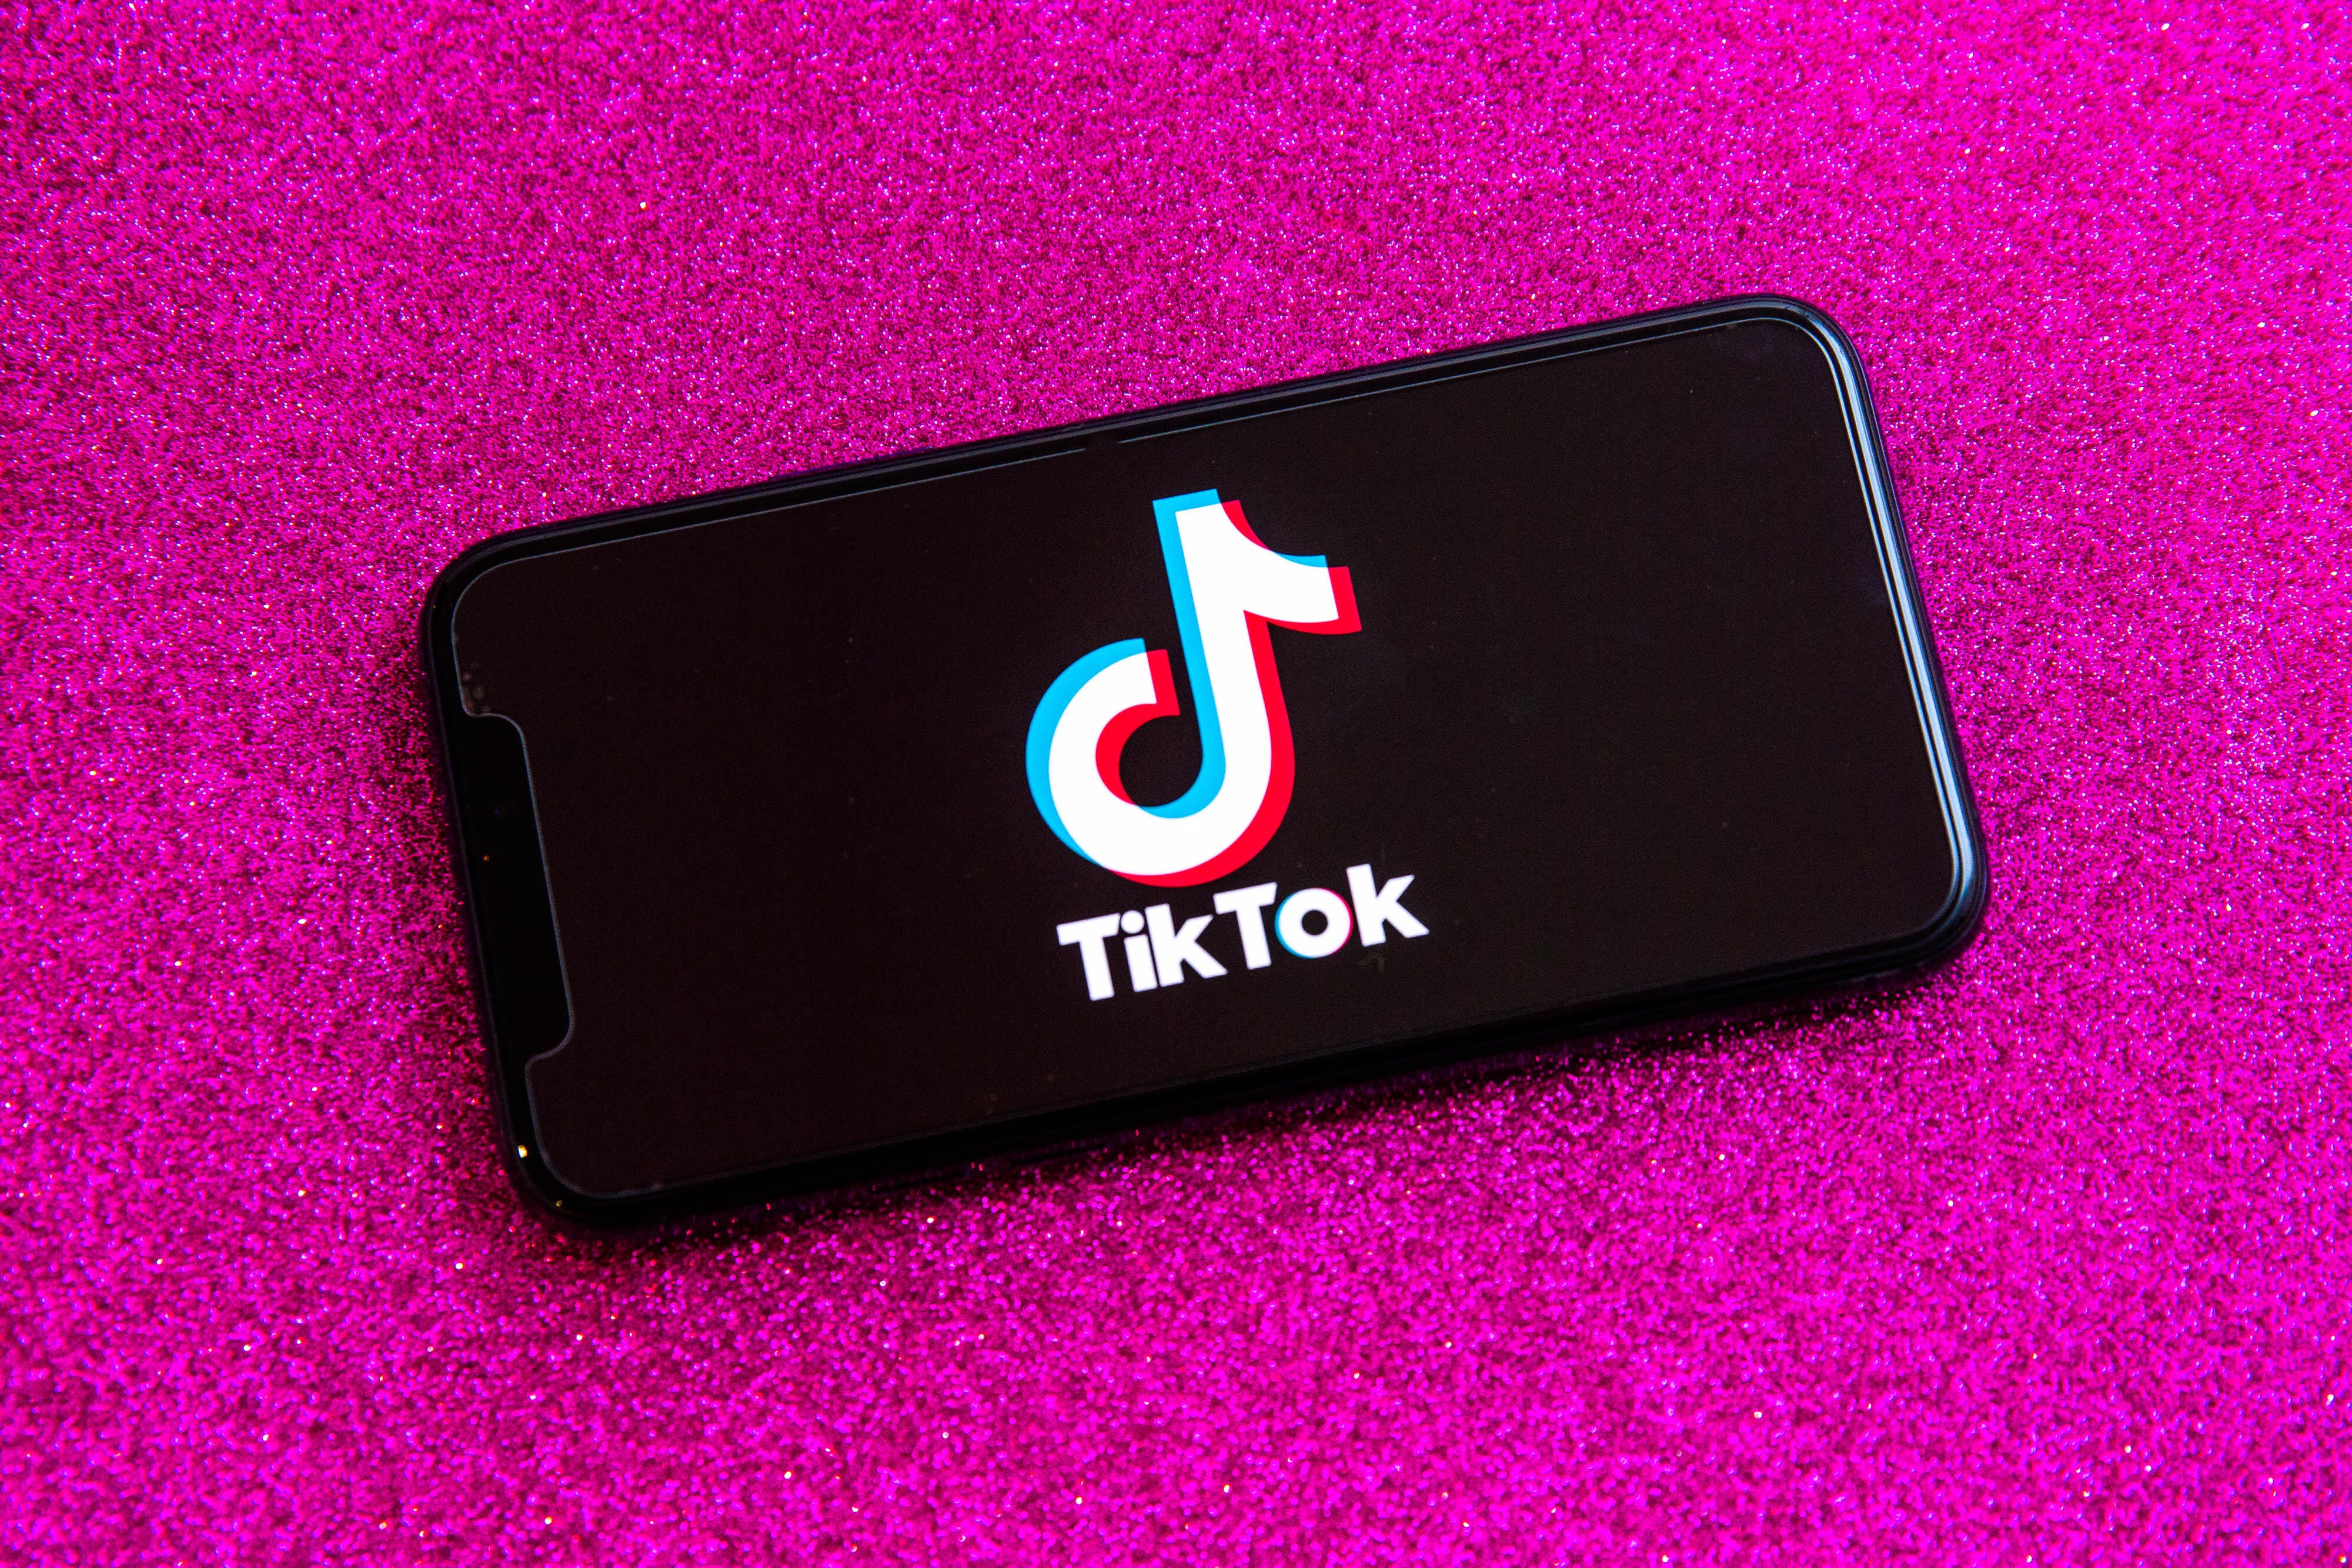 Ready to join TikTok in 2022? Here’s what you need to know